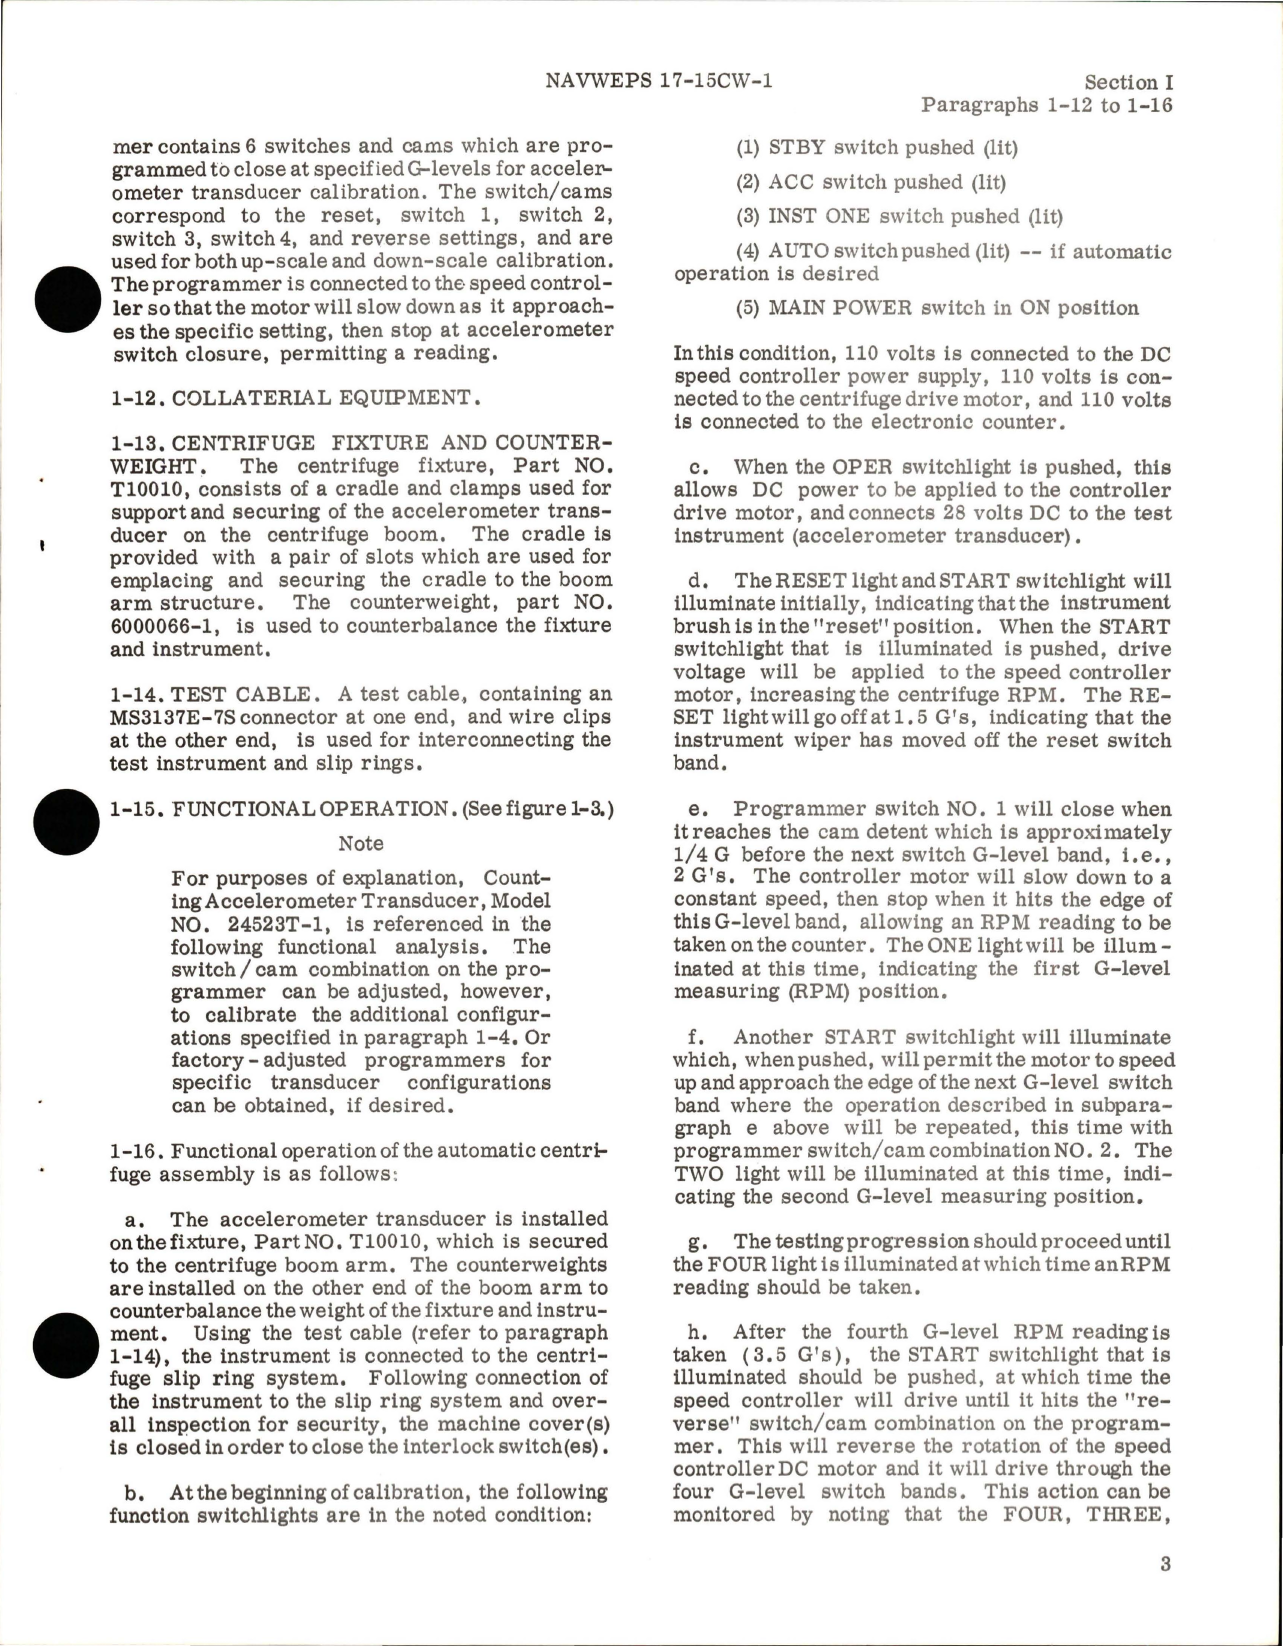 Sample page 9 from AirCorps Library document: Operation, Service Instructions for Automatic Centrifuge - Part E00030 